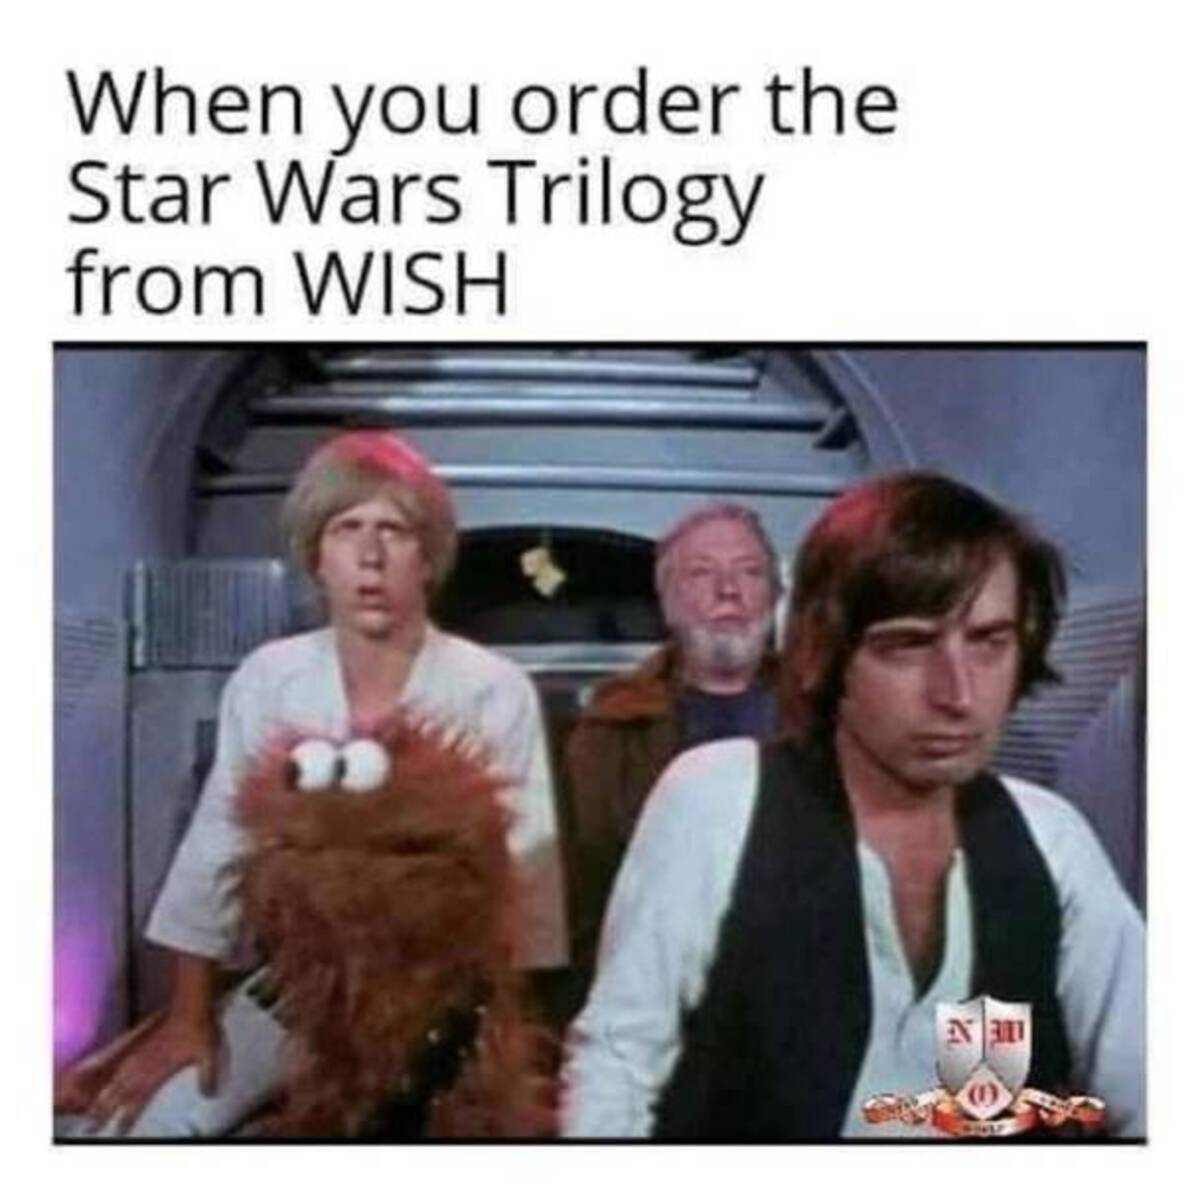 star wars wish meme - When you order the Star Wars Trilogy from Wish 30